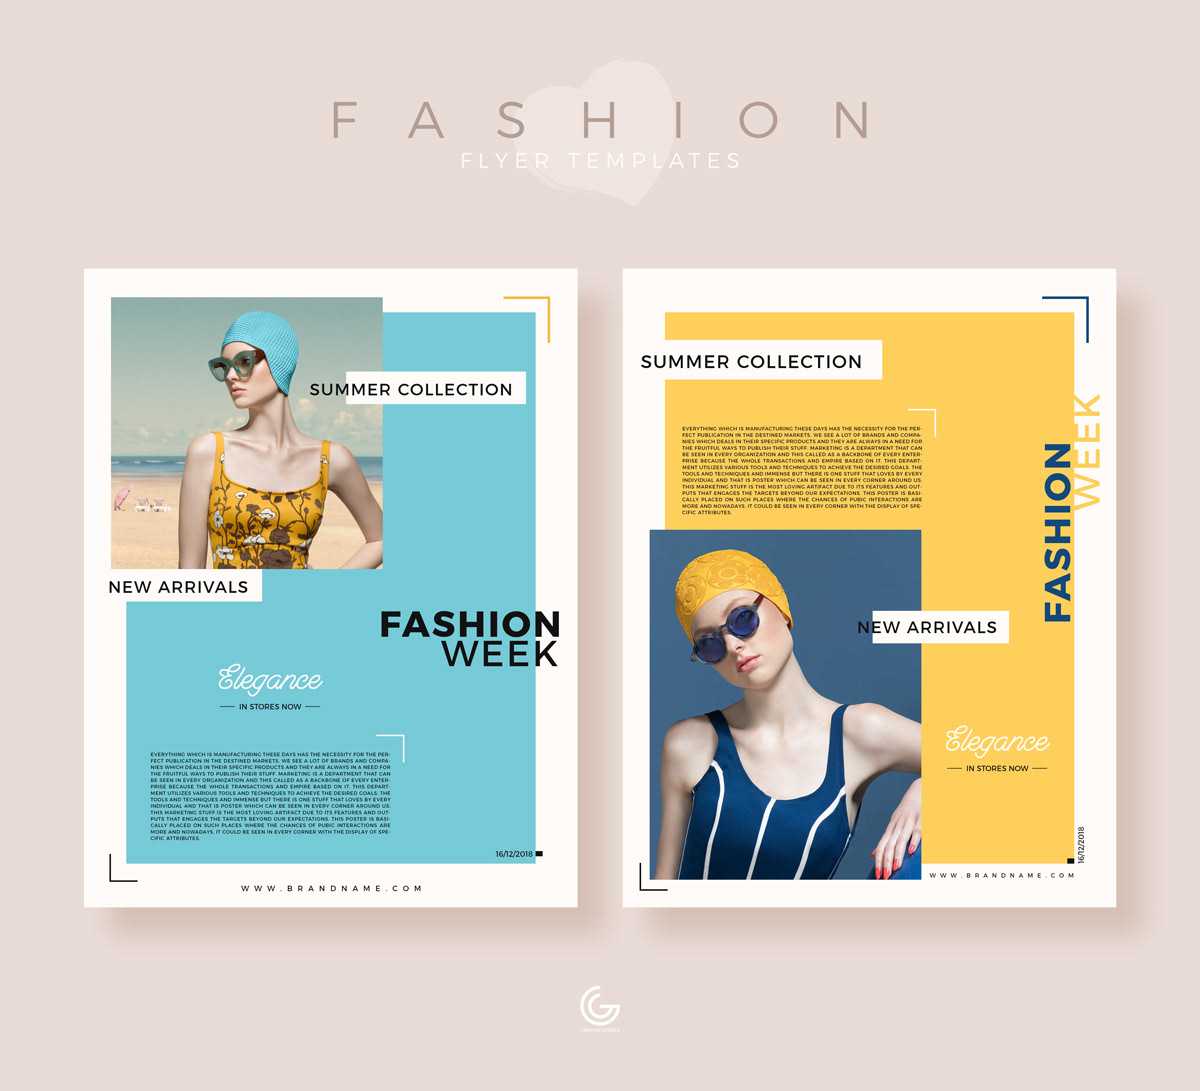 Free Fashion Flyer Templates For 2019 On Behance Throughout Fashion Flyers Templates For Free